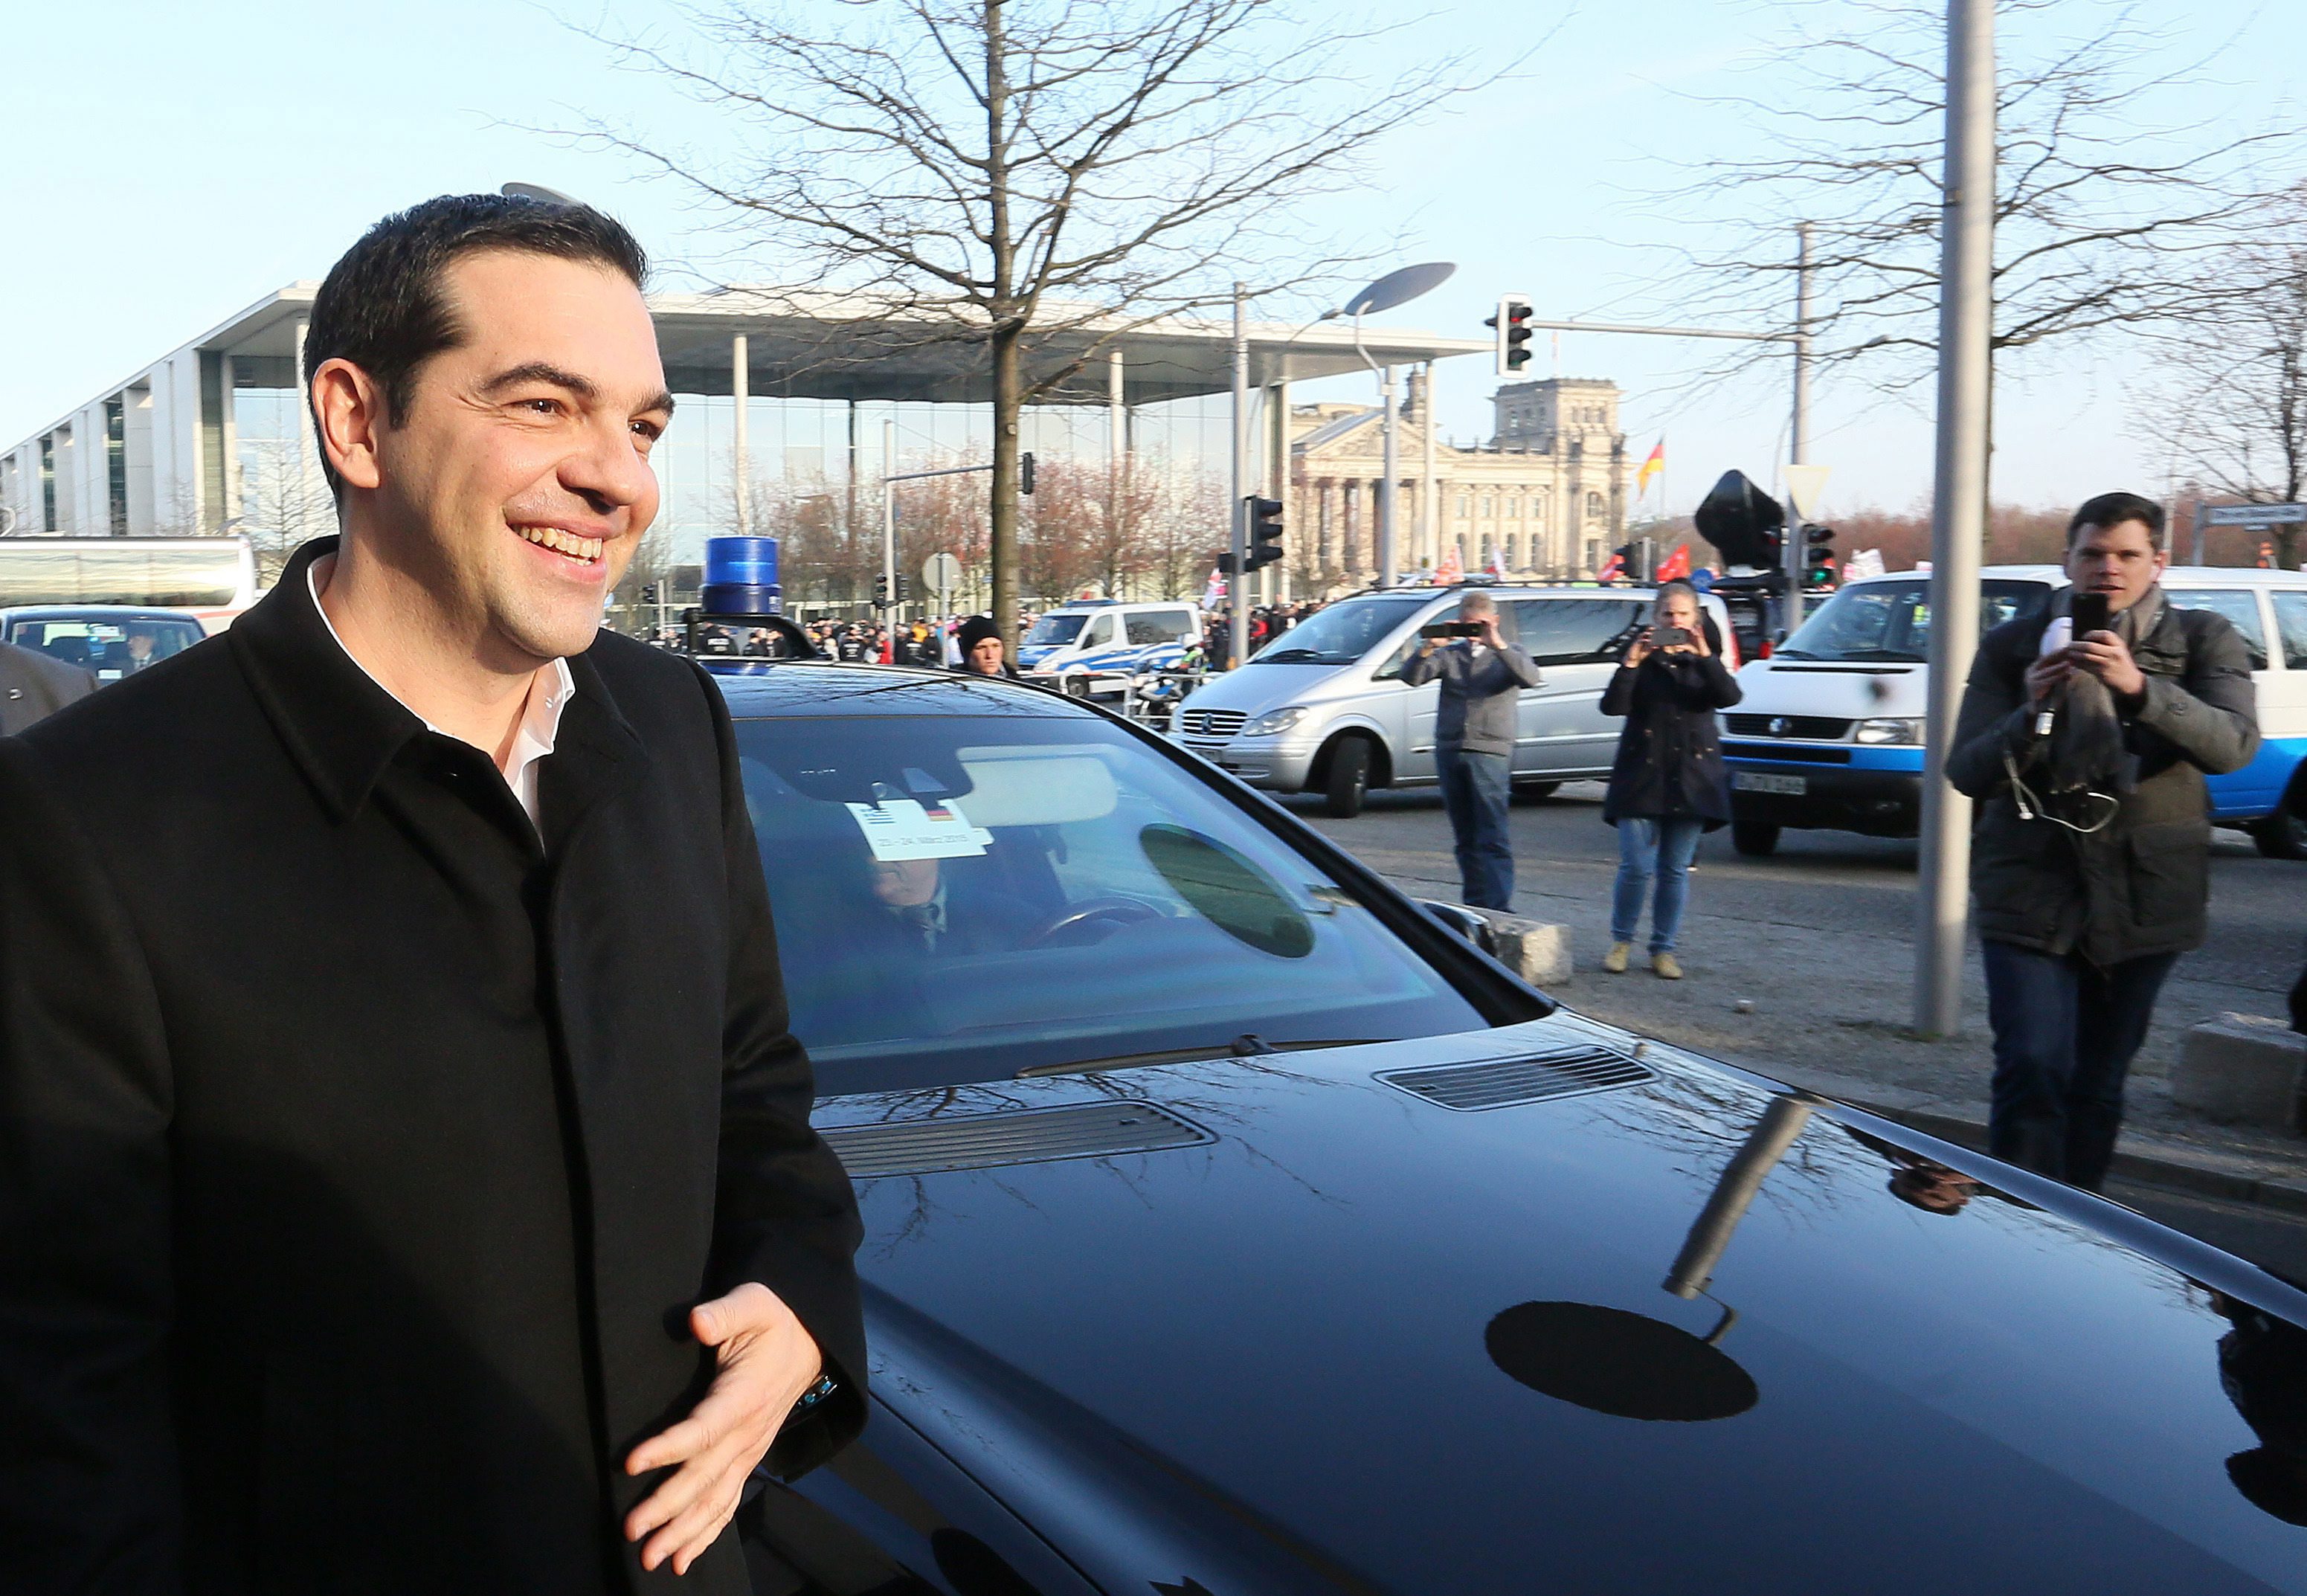 Barrage of offical meetings for PM Tsipras in Germany